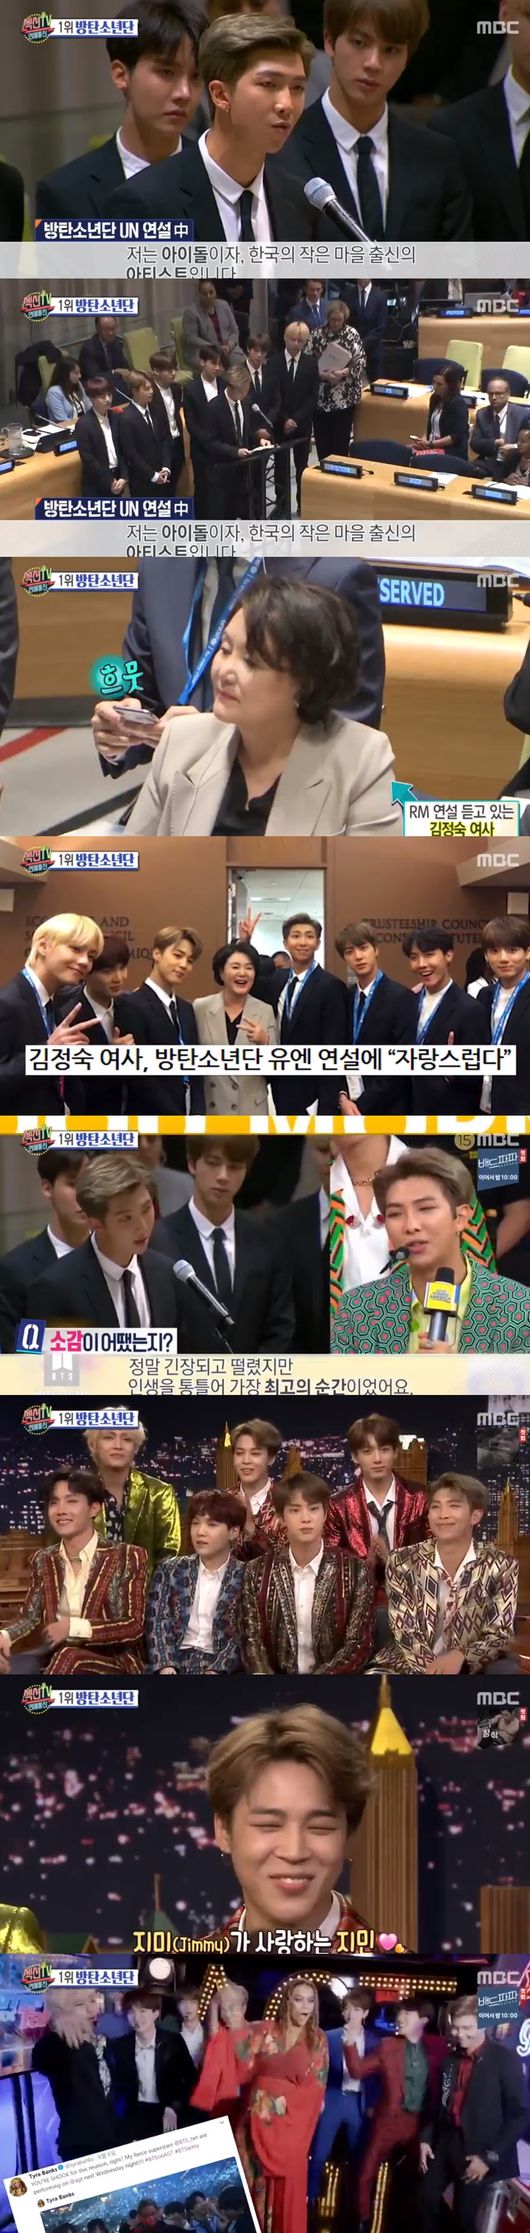 BTS gave a comment on the United Nations speech.MBC entertainment information program section TV entertainment communication broadcasted on the 1st was the first hot people in BTS.BTS was the first Korean singer to attend the United Nations General Assembly and give a speech for young people around the world.BTS attended the launch of the United Nations Childrens Fund (UNICEF and UNICEF) youth agenda Generation Unlimited partnership event held at the meeting room of the Trustee Board of Trustees at United Nations headquarters in New York on the 24th (local time).On this day, RM began his seven-minute English speech as a representative of BTS.I was really nervous and nervous, but it was the best moment of my life, BTS RM said in a US celebrity program, as a testimony to the United Nations speech.